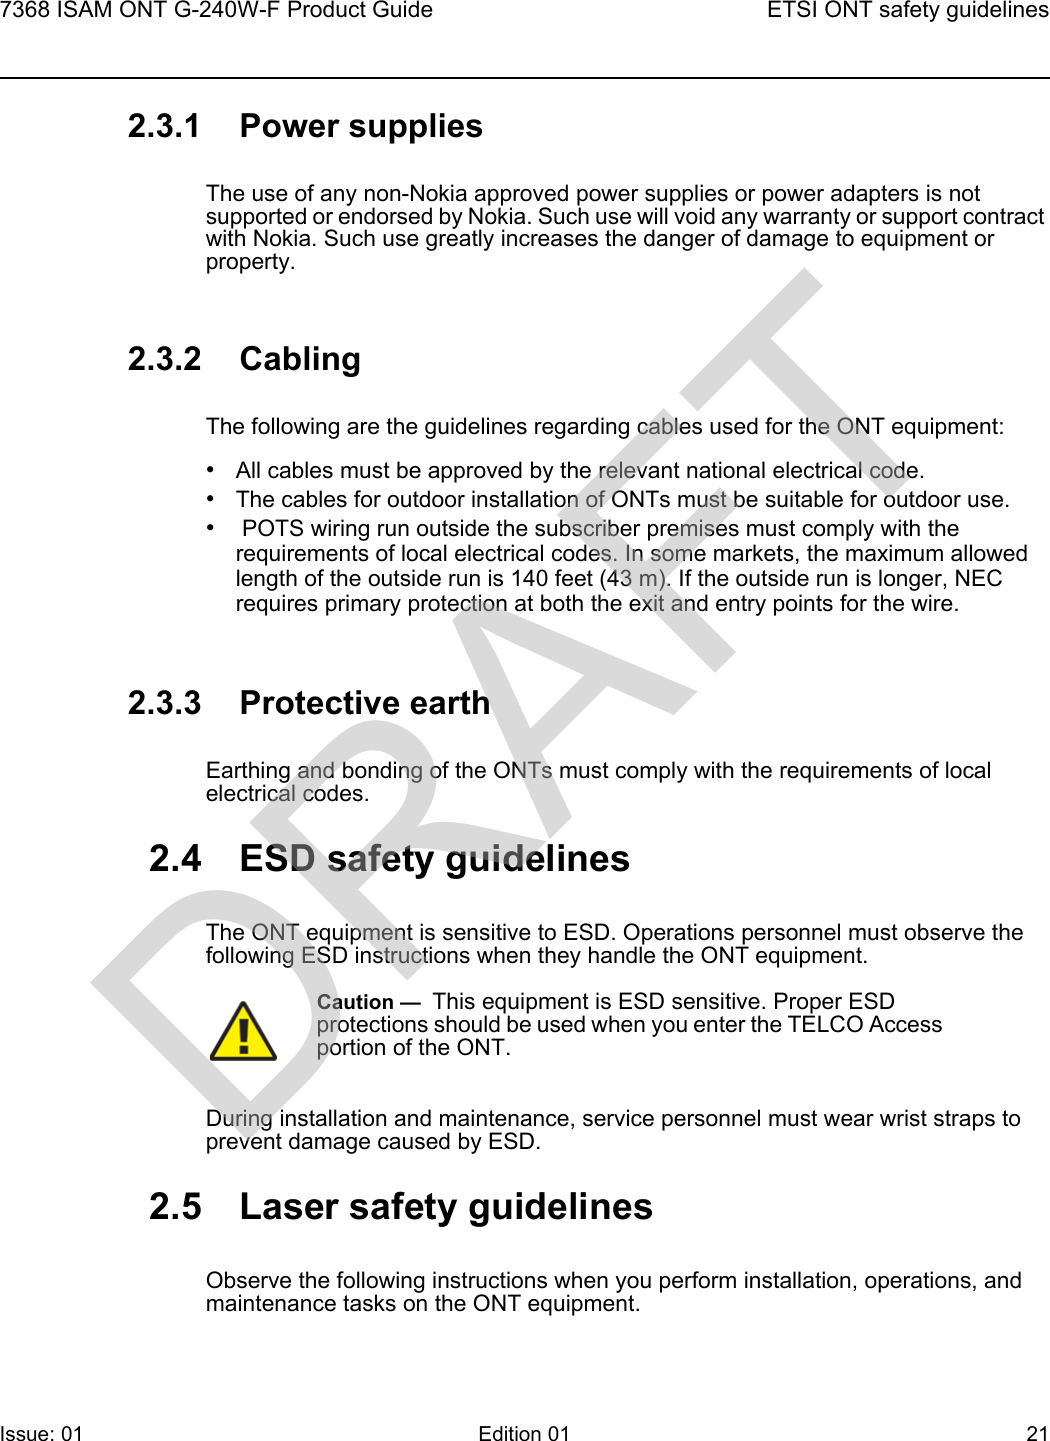 7368 ISAM ONT G-240W-F Product Guide ETSI ONT safety guidelinesIssue: 01 Edition 01 21 2.3.1 Power suppliesThe use of any non-Nokia approved power supplies or power adapters is not supported or endorsed by Nokia. Such use will void any warranty or support contract with Nokia. Such use greatly increases the danger of damage to equipment or property.2.3.2 CablingThe following are the guidelines regarding cables used for the ONT equipment:•All cables must be approved by the relevant national electrical code.•The cables for outdoor installation of ONTs must be suitable for outdoor use.• POTS wiring run outside the subscriber premises must comply with the requirements of local electrical codes. In some markets, the maximum allowed length of the outside run is 140 feet (43 m). If the outside run is longer, NEC requires primary protection at both the exit and entry points for the wire.2.3.3 Protective earthEarthing and bonding of the ONTs must comply with the requirements of local electrical codes.2.4 ESD safety guidelinesThe ONT equipment is sensitive to ESD. Operations personnel must observe the following ESD instructions when they handle the ONT equipment. During installation and maintenance, service personnel must wear wrist straps to prevent damage caused by ESD.2.5 Laser safety guidelinesObserve the following instructions when you perform installation, operations, and maintenance tasks on the ONT equipment.Caution —  This equipment is ESD sensitive. Proper ESD protections should be used when you enter the TELCO Access portion of the ONT.DRAFT